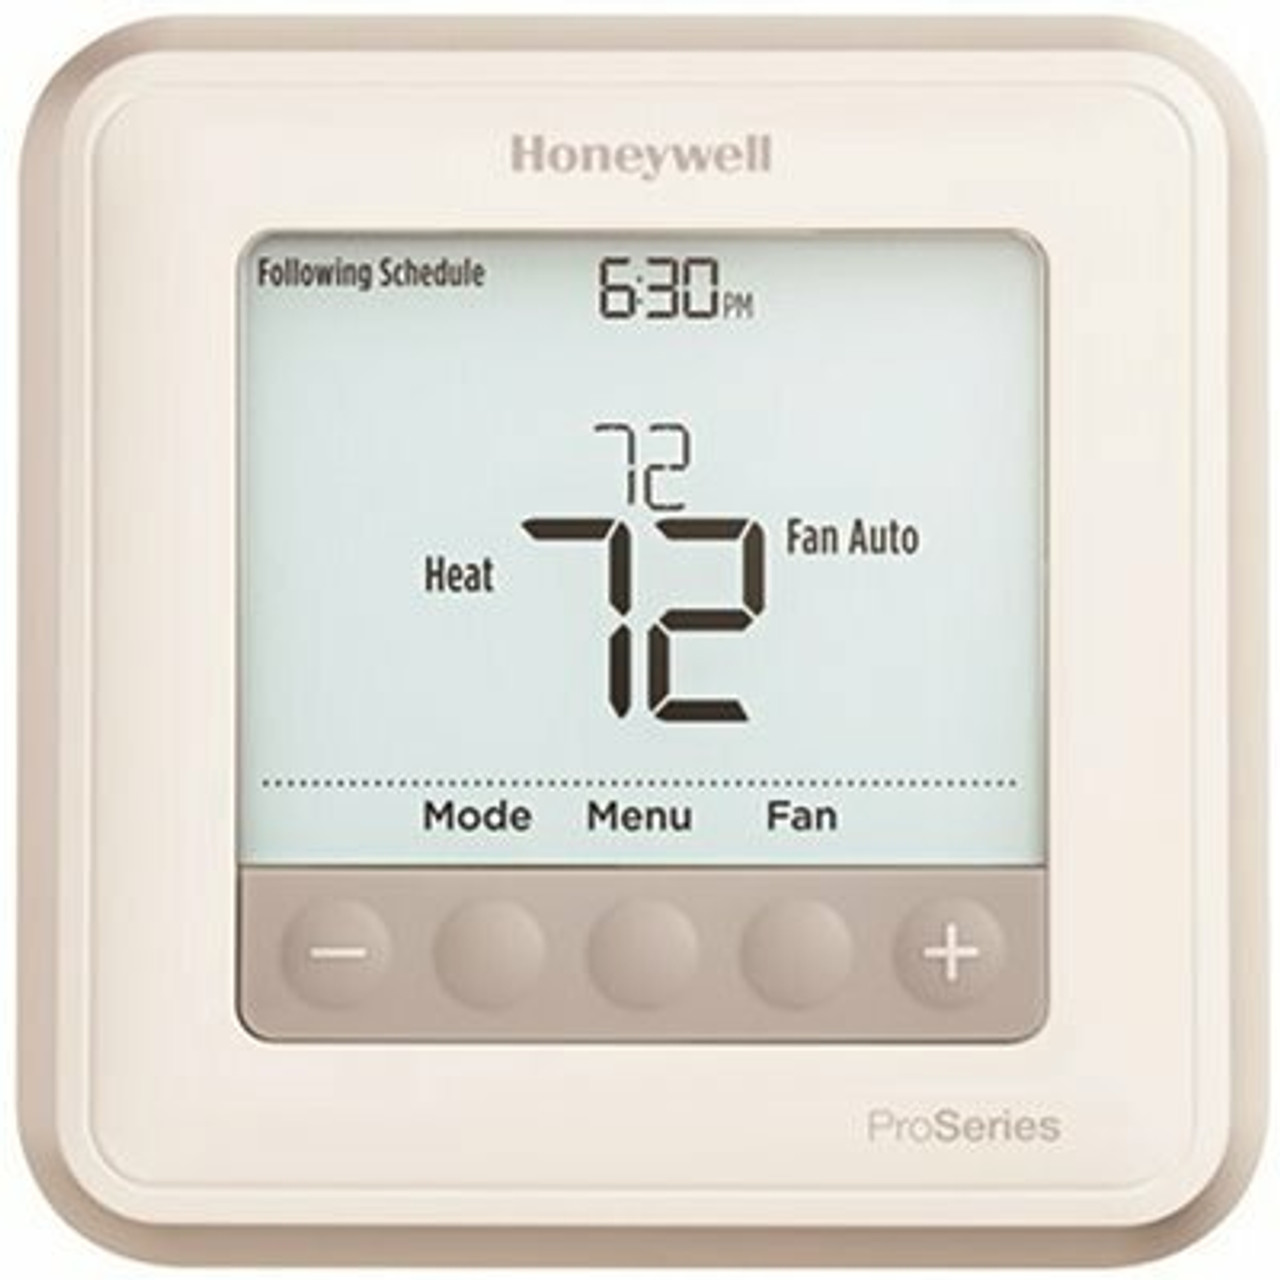 Honeywell T6 Pro 7-Day, 5-1-1, 5-2 Programmable Or Non-Programmable Thermostat 2H/1C - 3570151